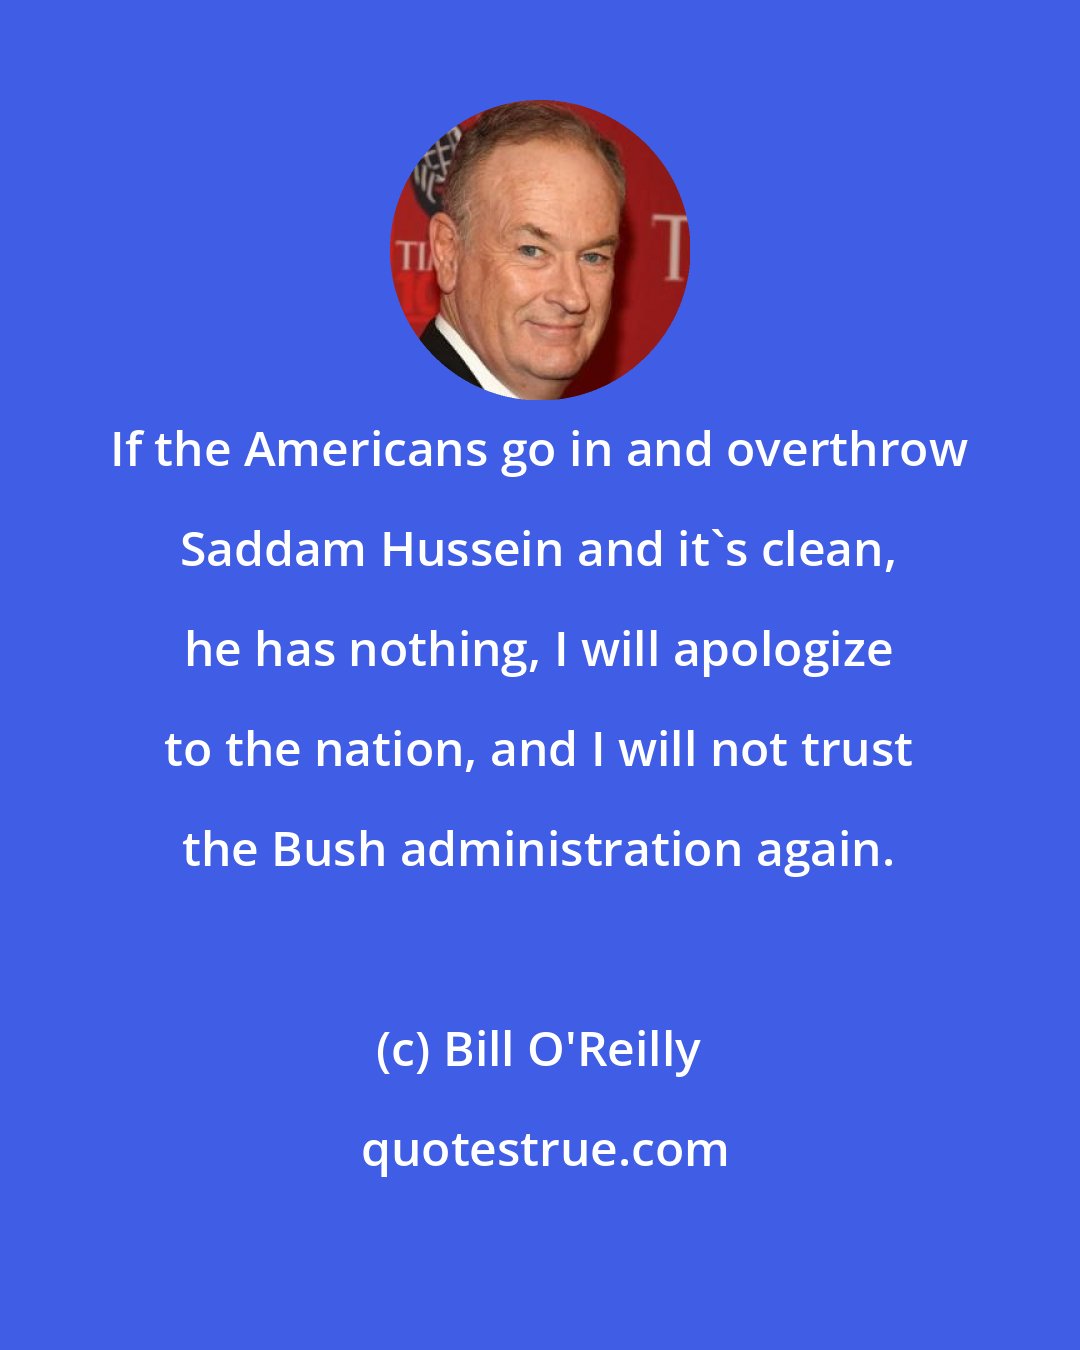 Bill O'Reilly: If the Americans go in and overthrow Saddam Hussein and it's clean, he has nothing, I will apologize to the nation, and I will not trust the Bush administration again.